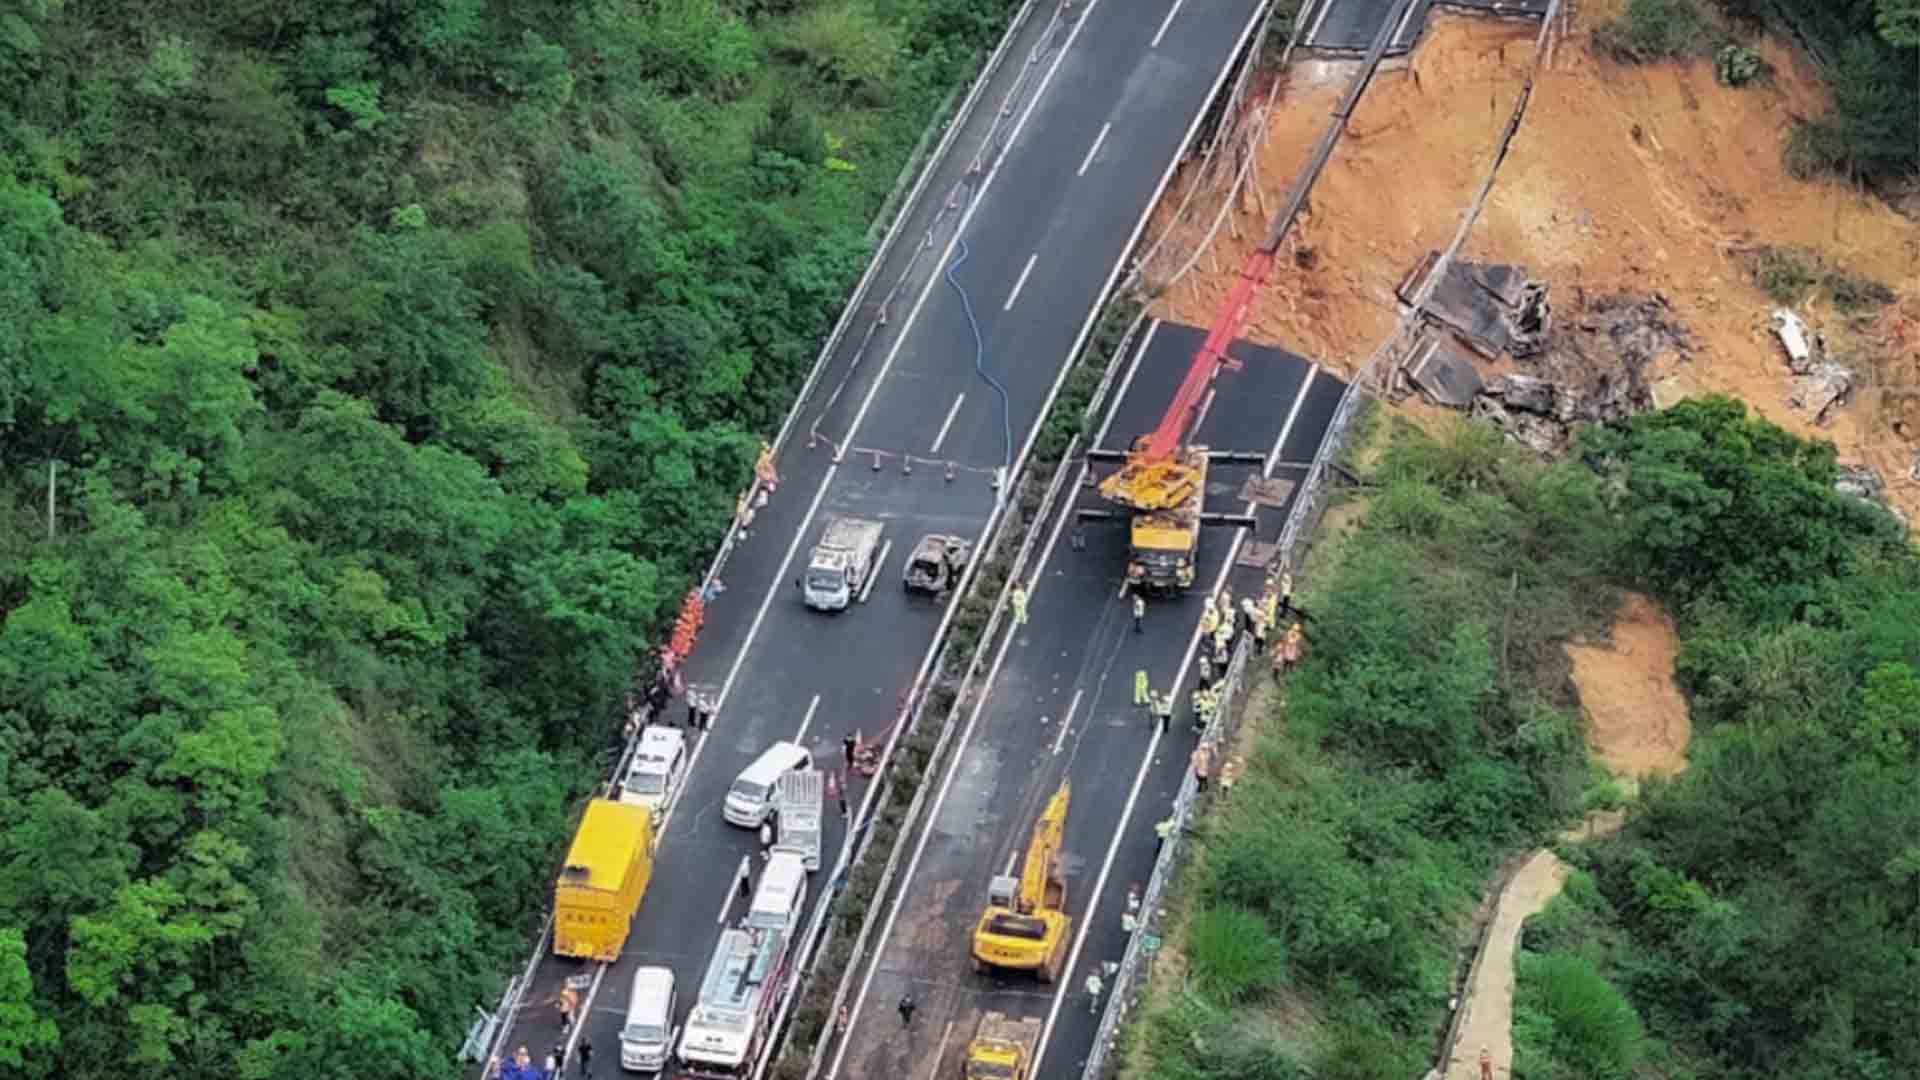 Highway collapse claims 24 lives, injures 30 in China